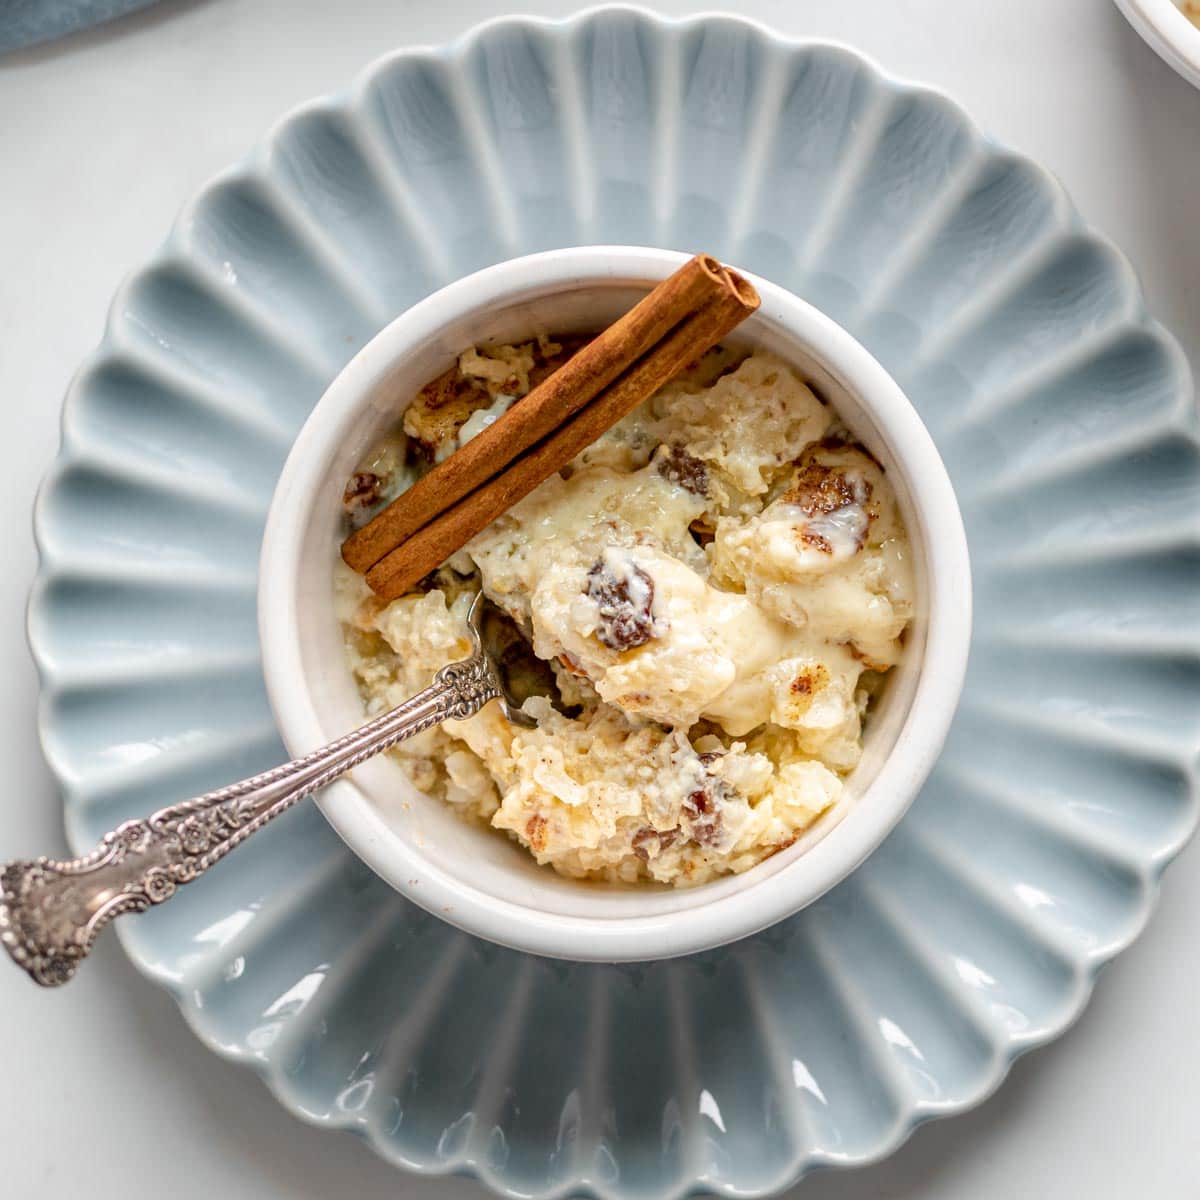 Baked Rice Pudding served in a ramekins on a light blue scalloped plate